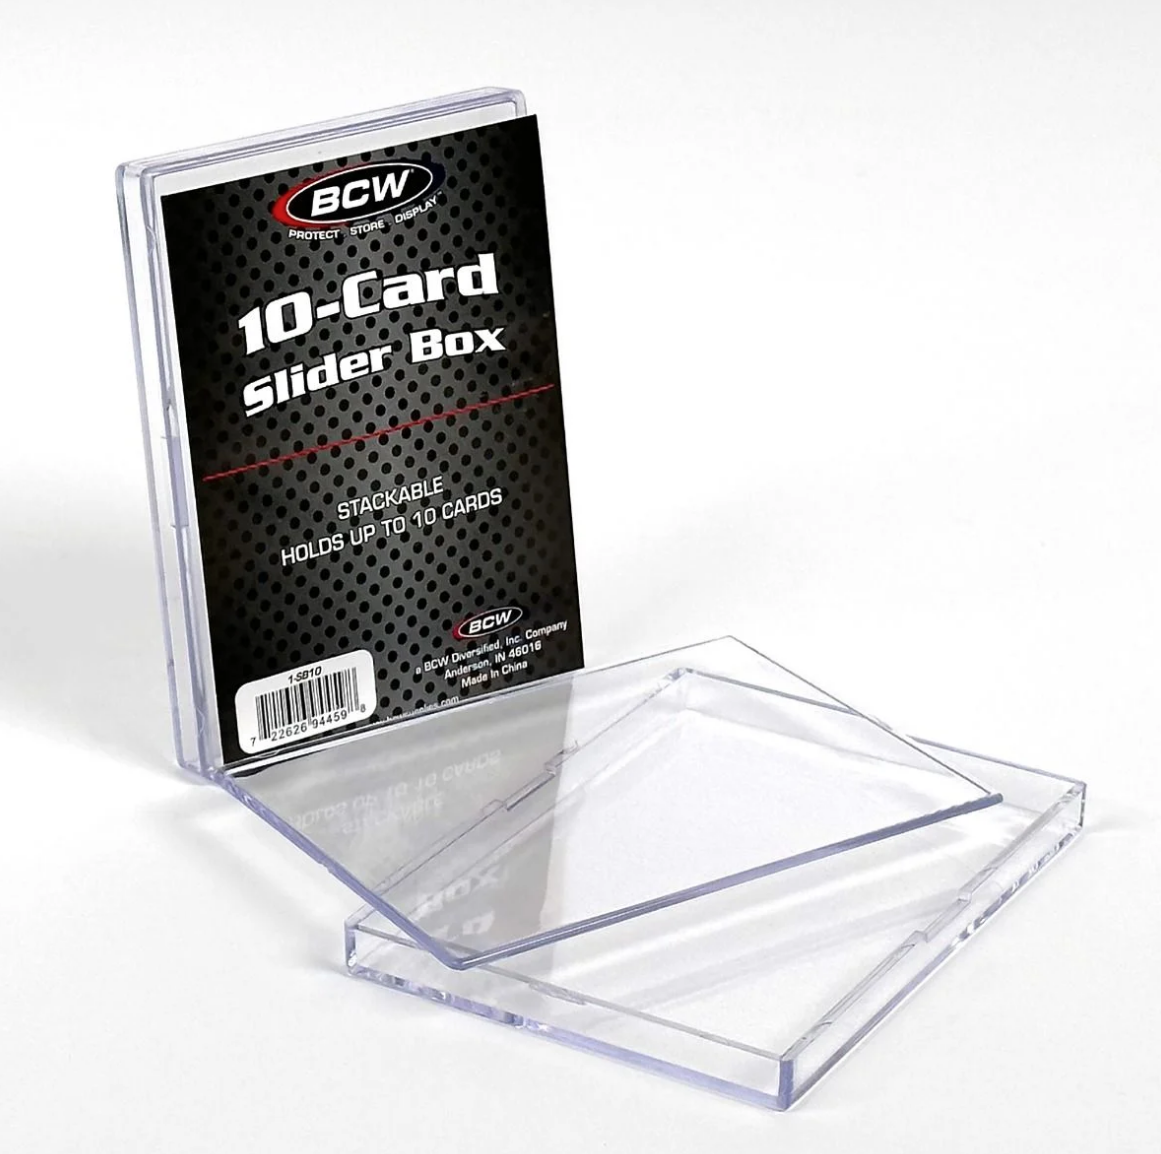 2-Piece 10 Count Clear Card Slider Box - Sports Cards Norge